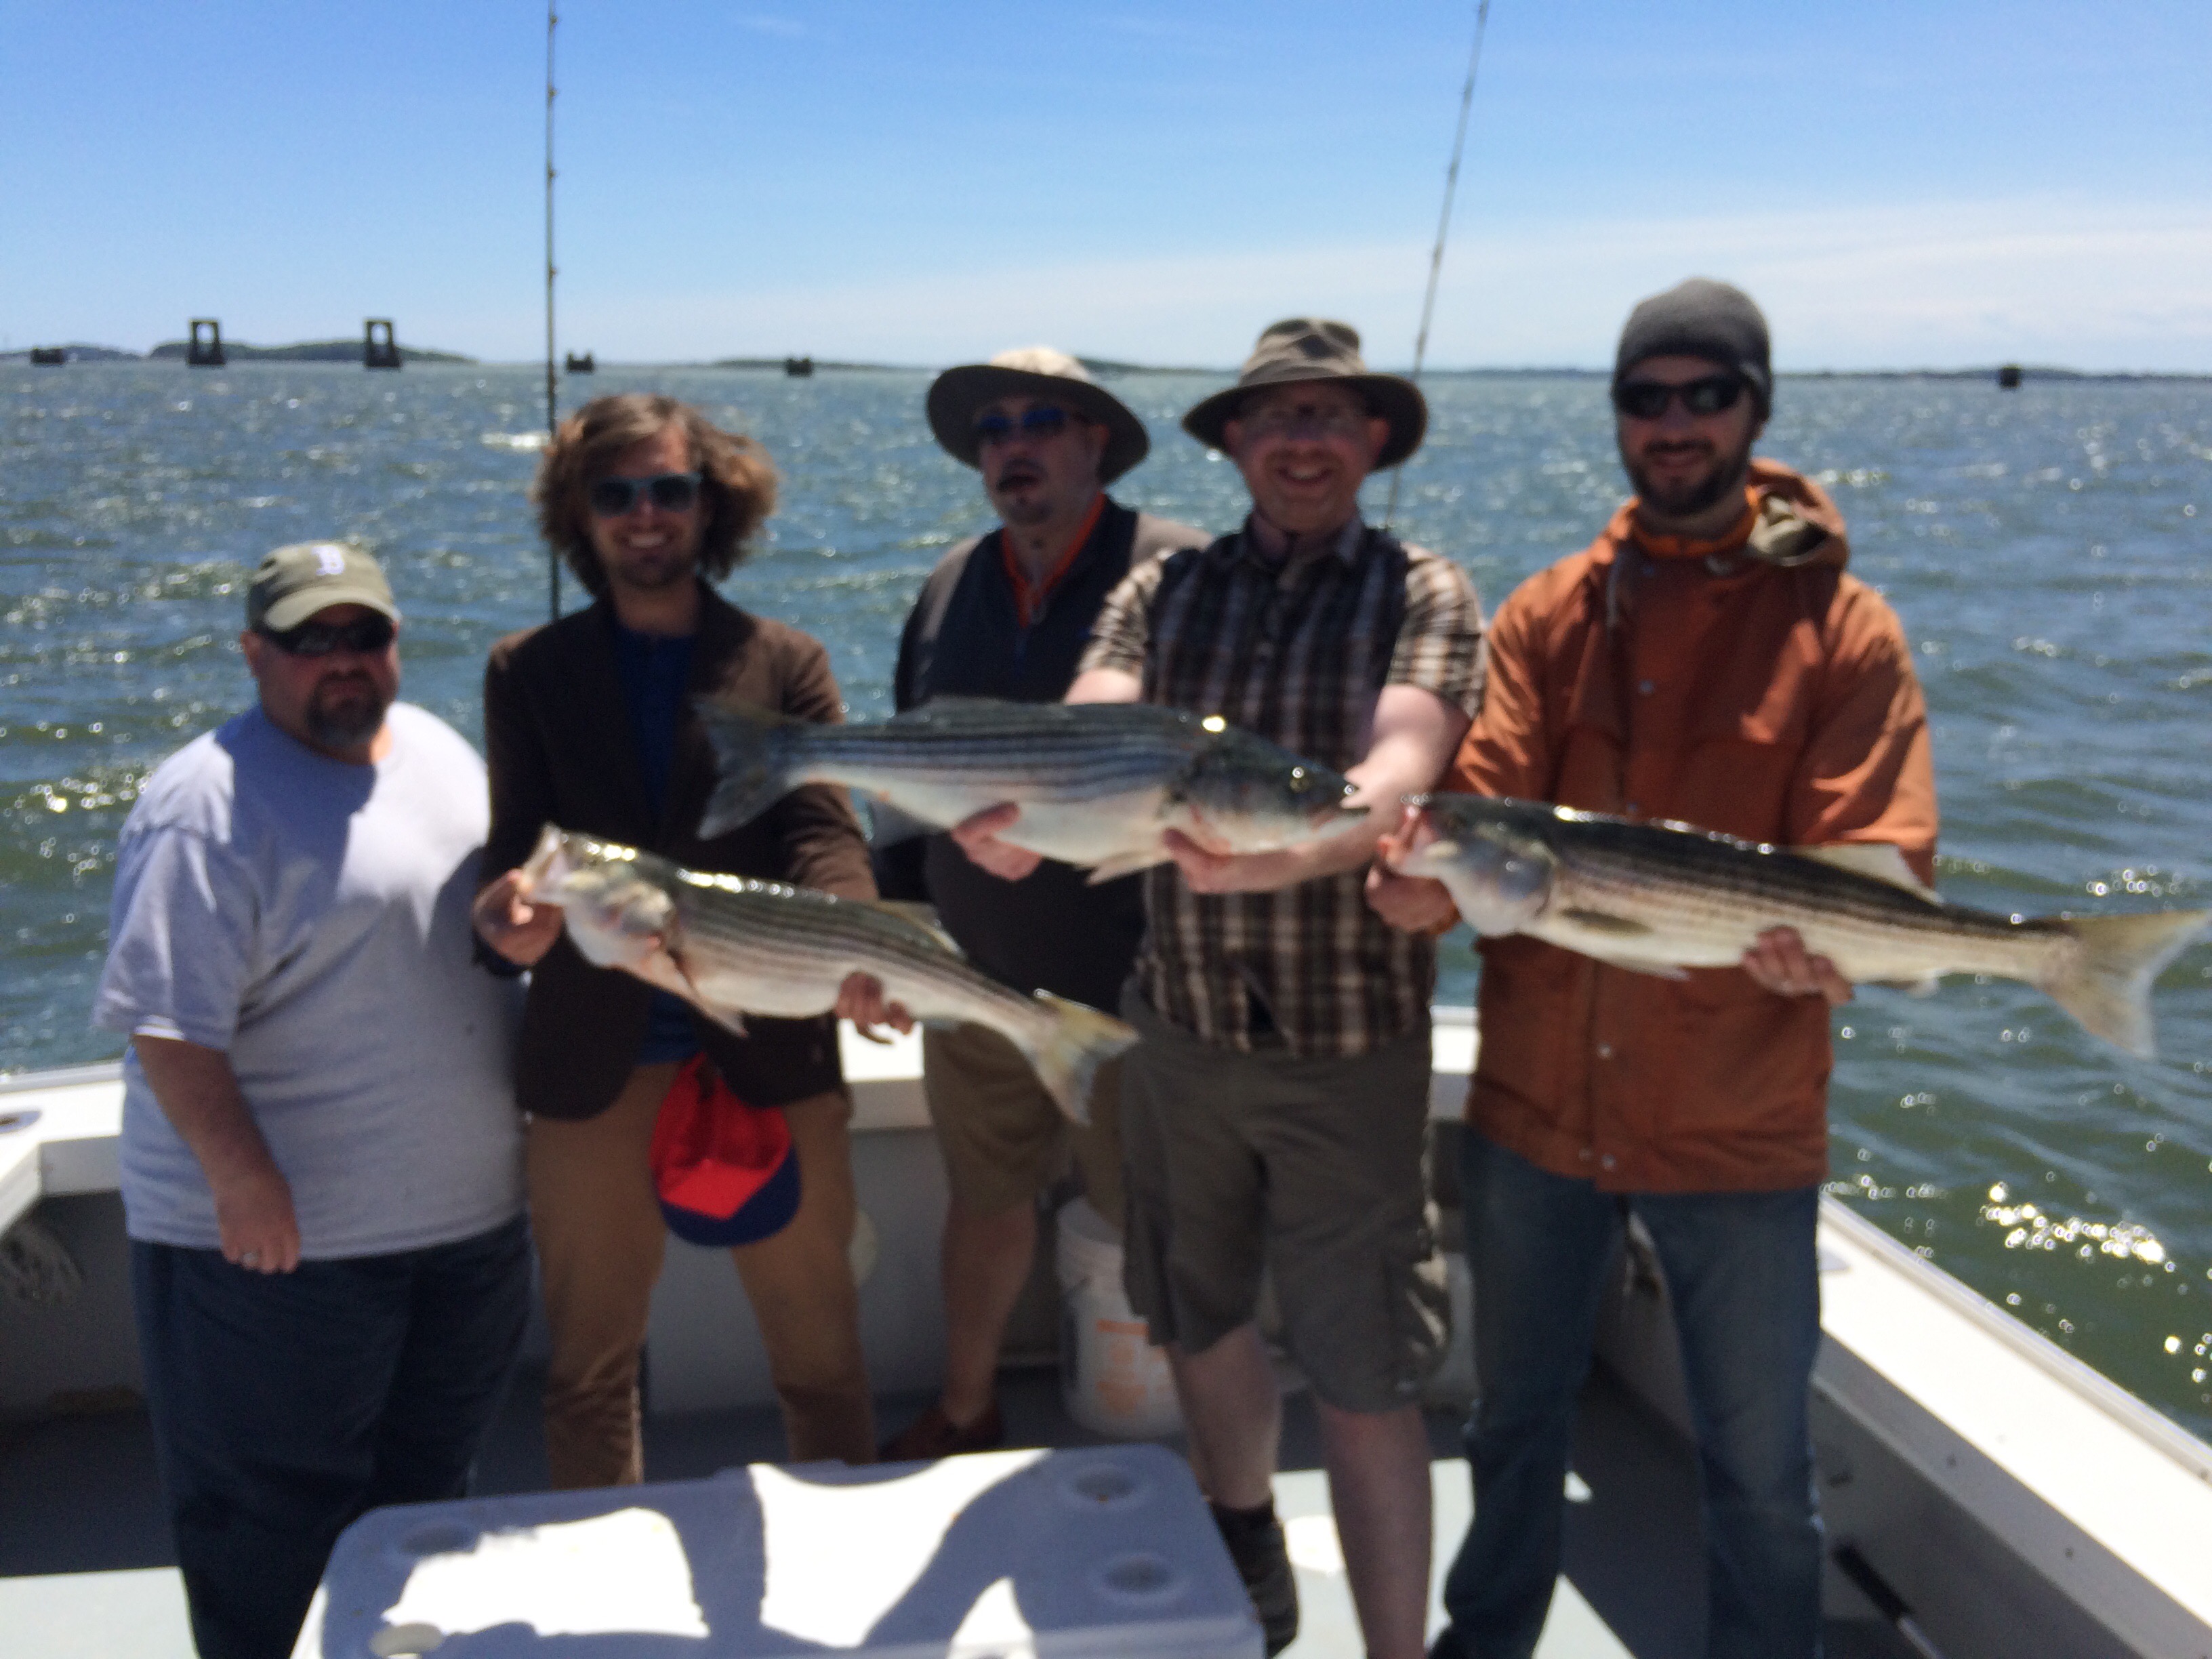 Boston harbor striped bass fishing with a group of anglers